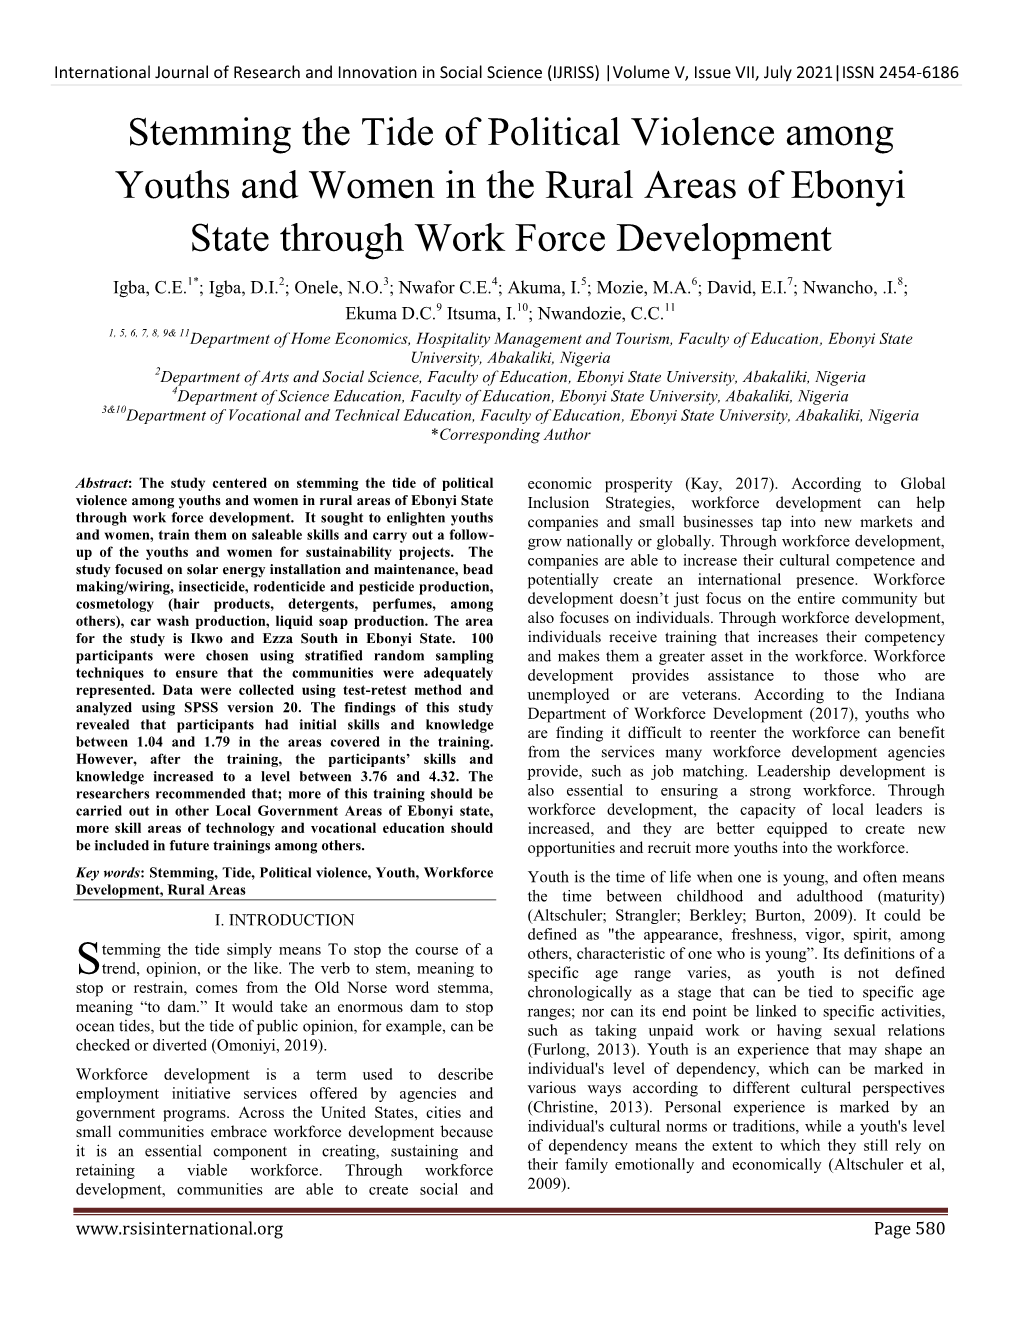 Stemming the Tide of Political Violence Among Youths and Women in the Rural Areas of Ebonyi State Through Work Force Development